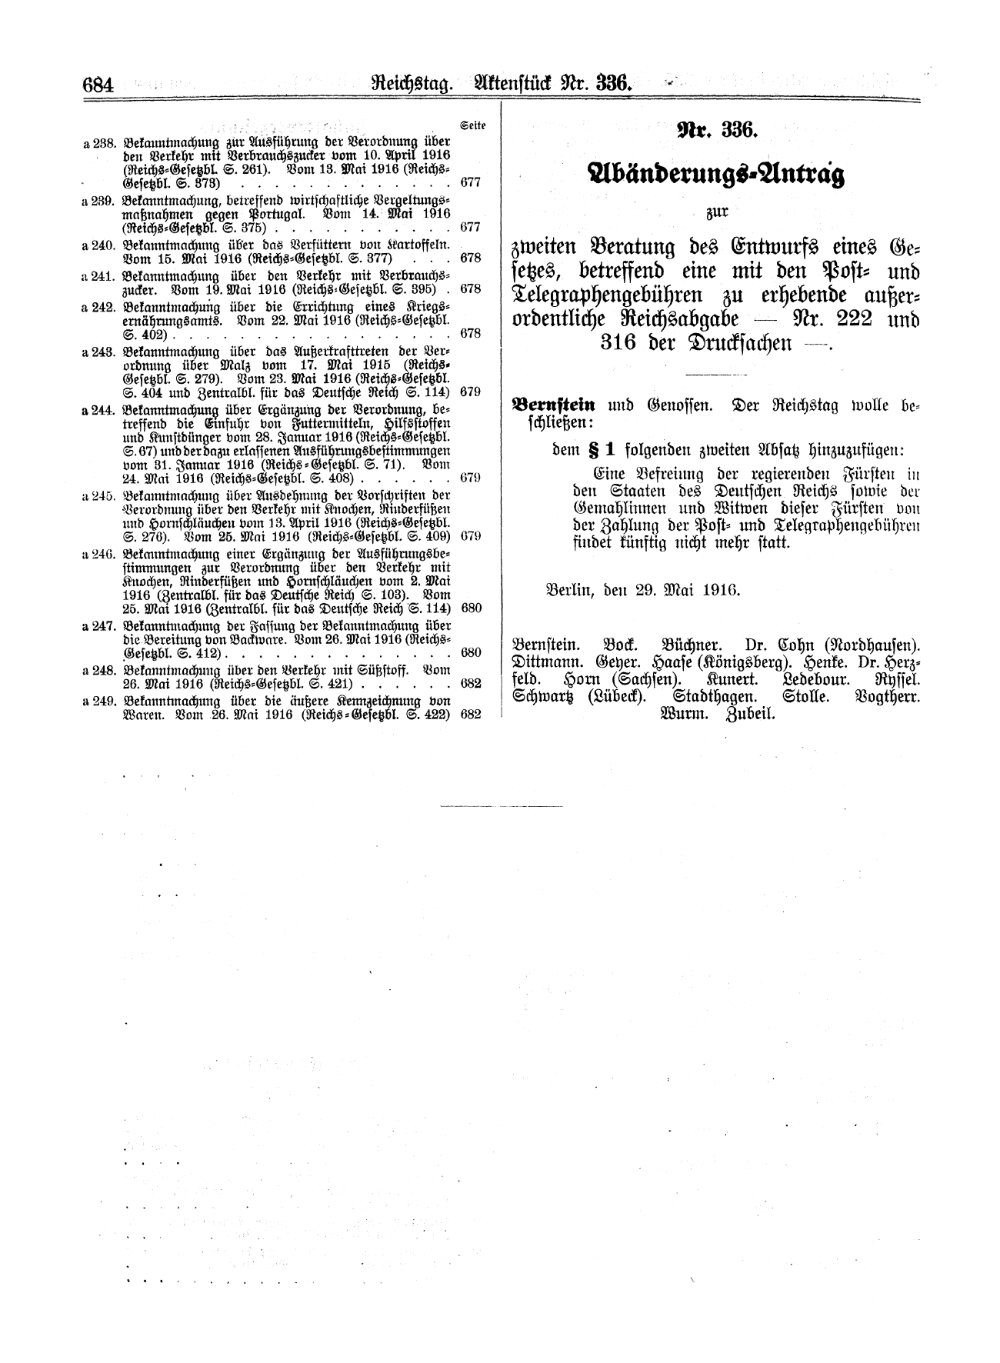 Scan of page 684